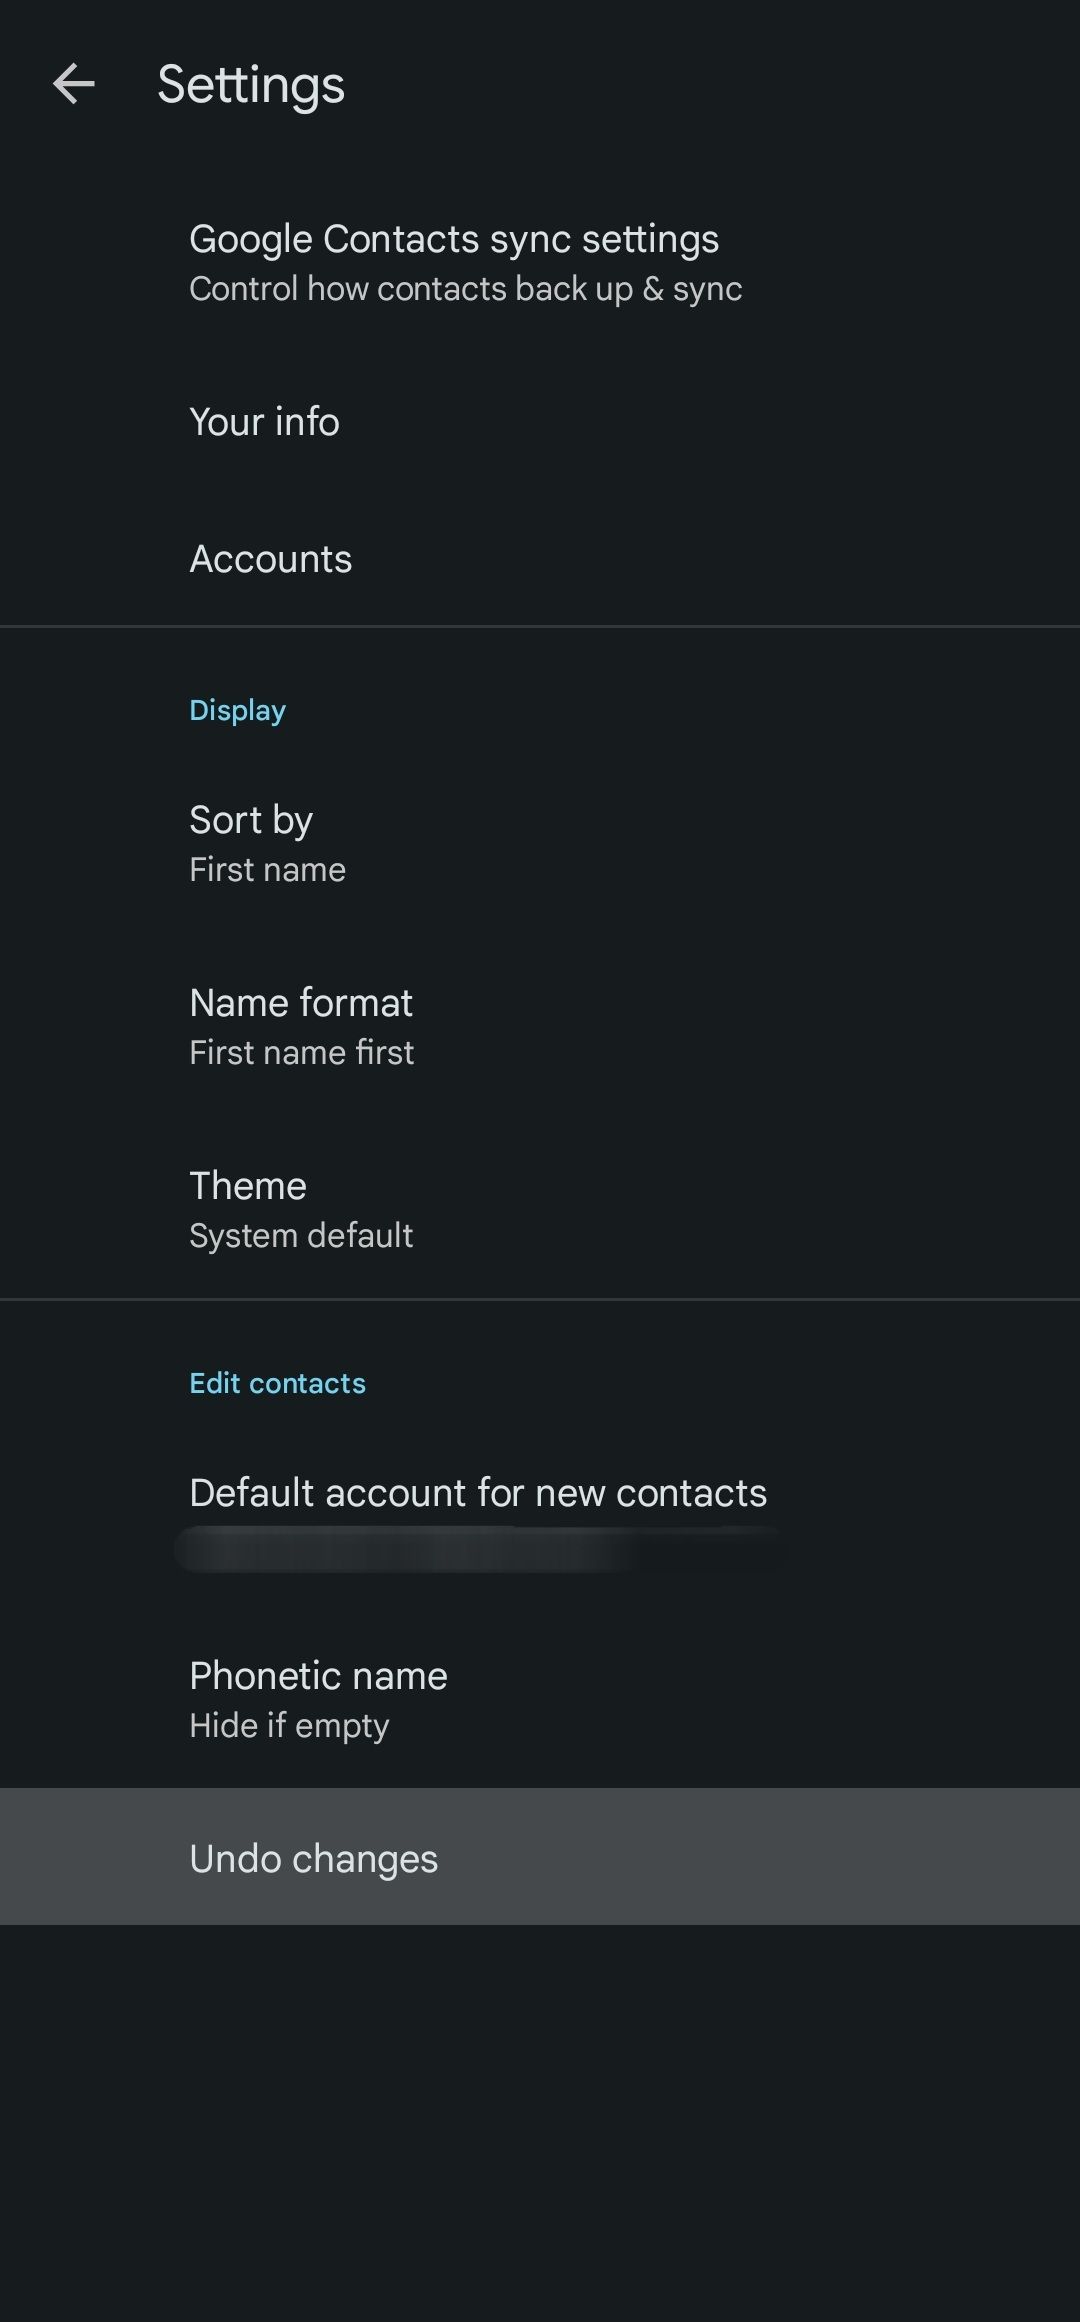 Tap the 'Undo changes' option to restore delete contacts